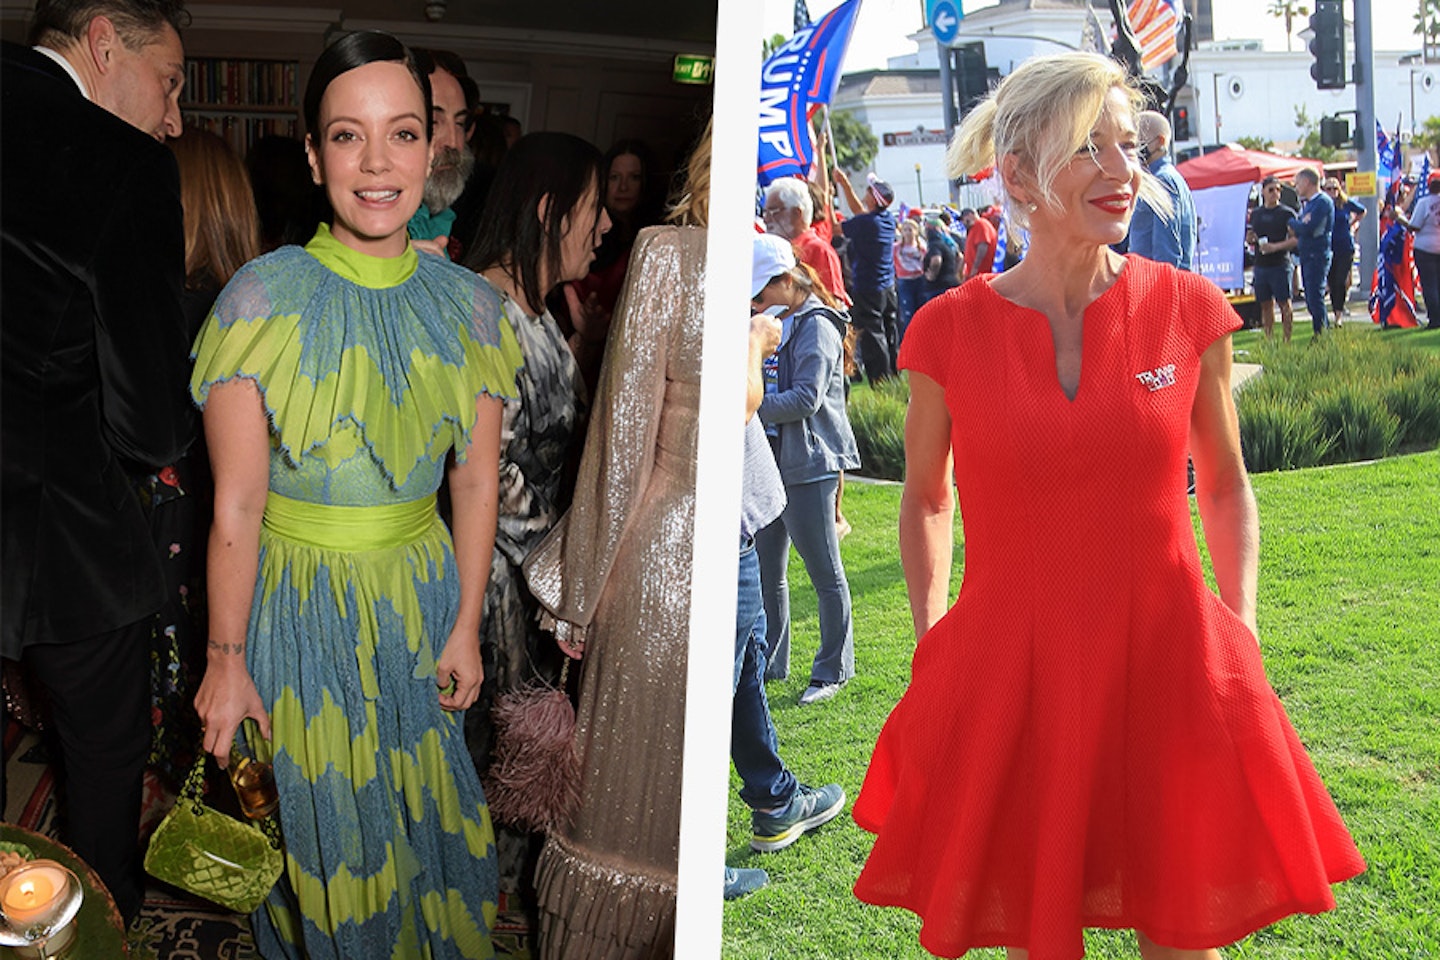 Left- Lily Allen attends the Charles Finch & CHANEL Pre-BAFTA Party 2020 in London. Right- Katie Hopkins is seen on October 24, 2020 in Los Angeles, California.